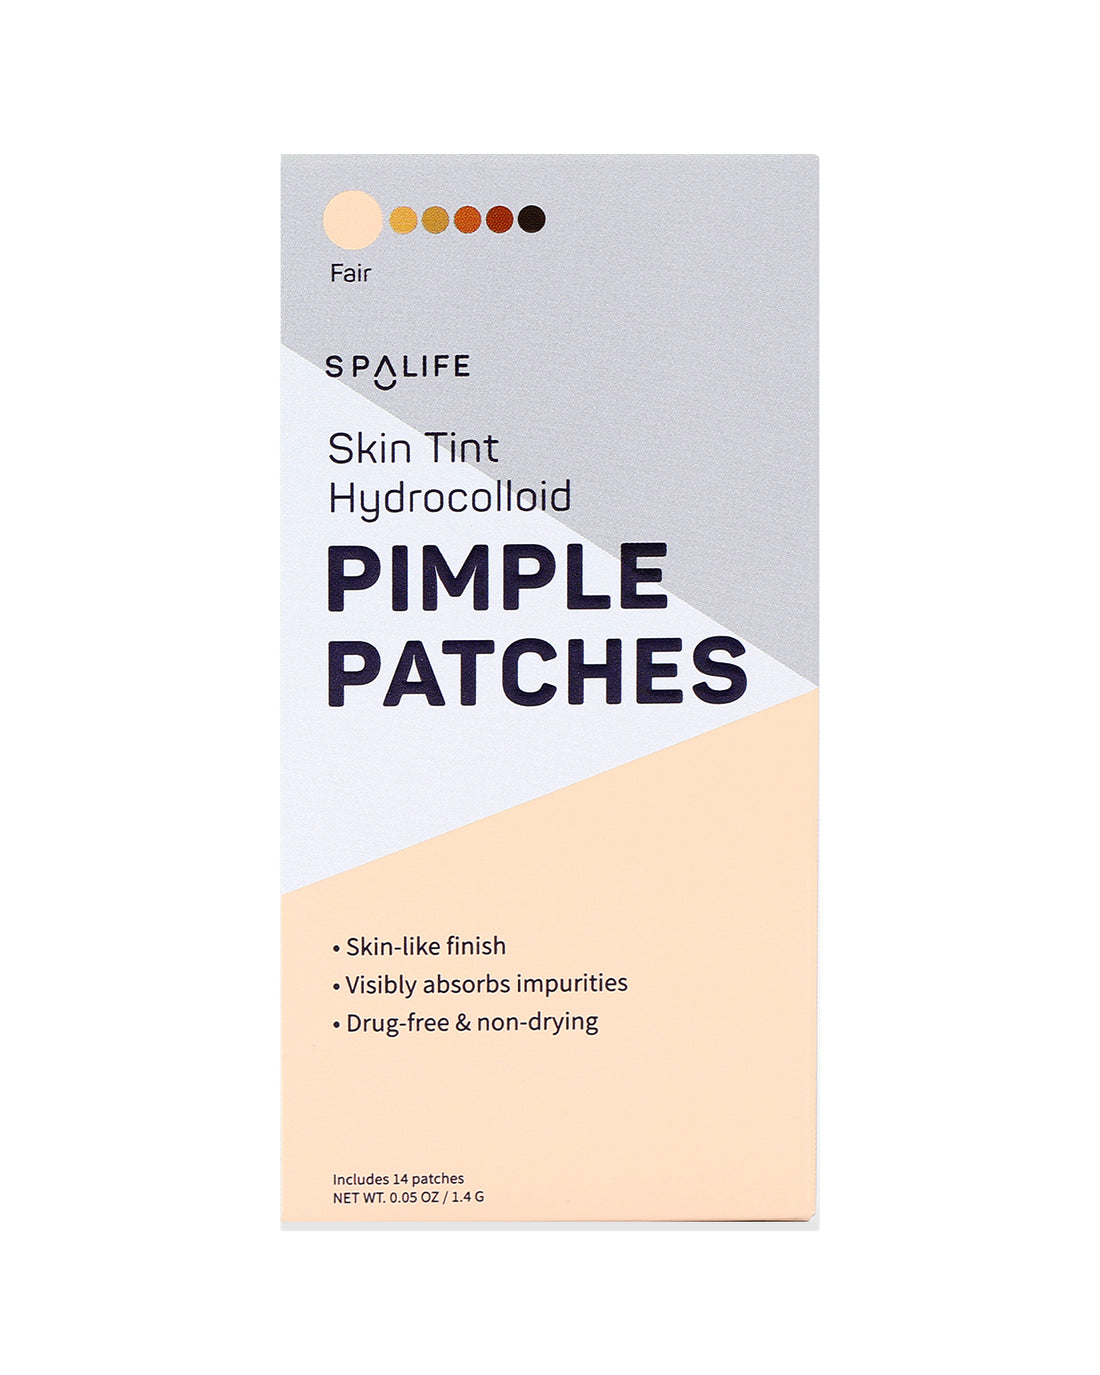 Skin_tint_pimple_patches_packe-738